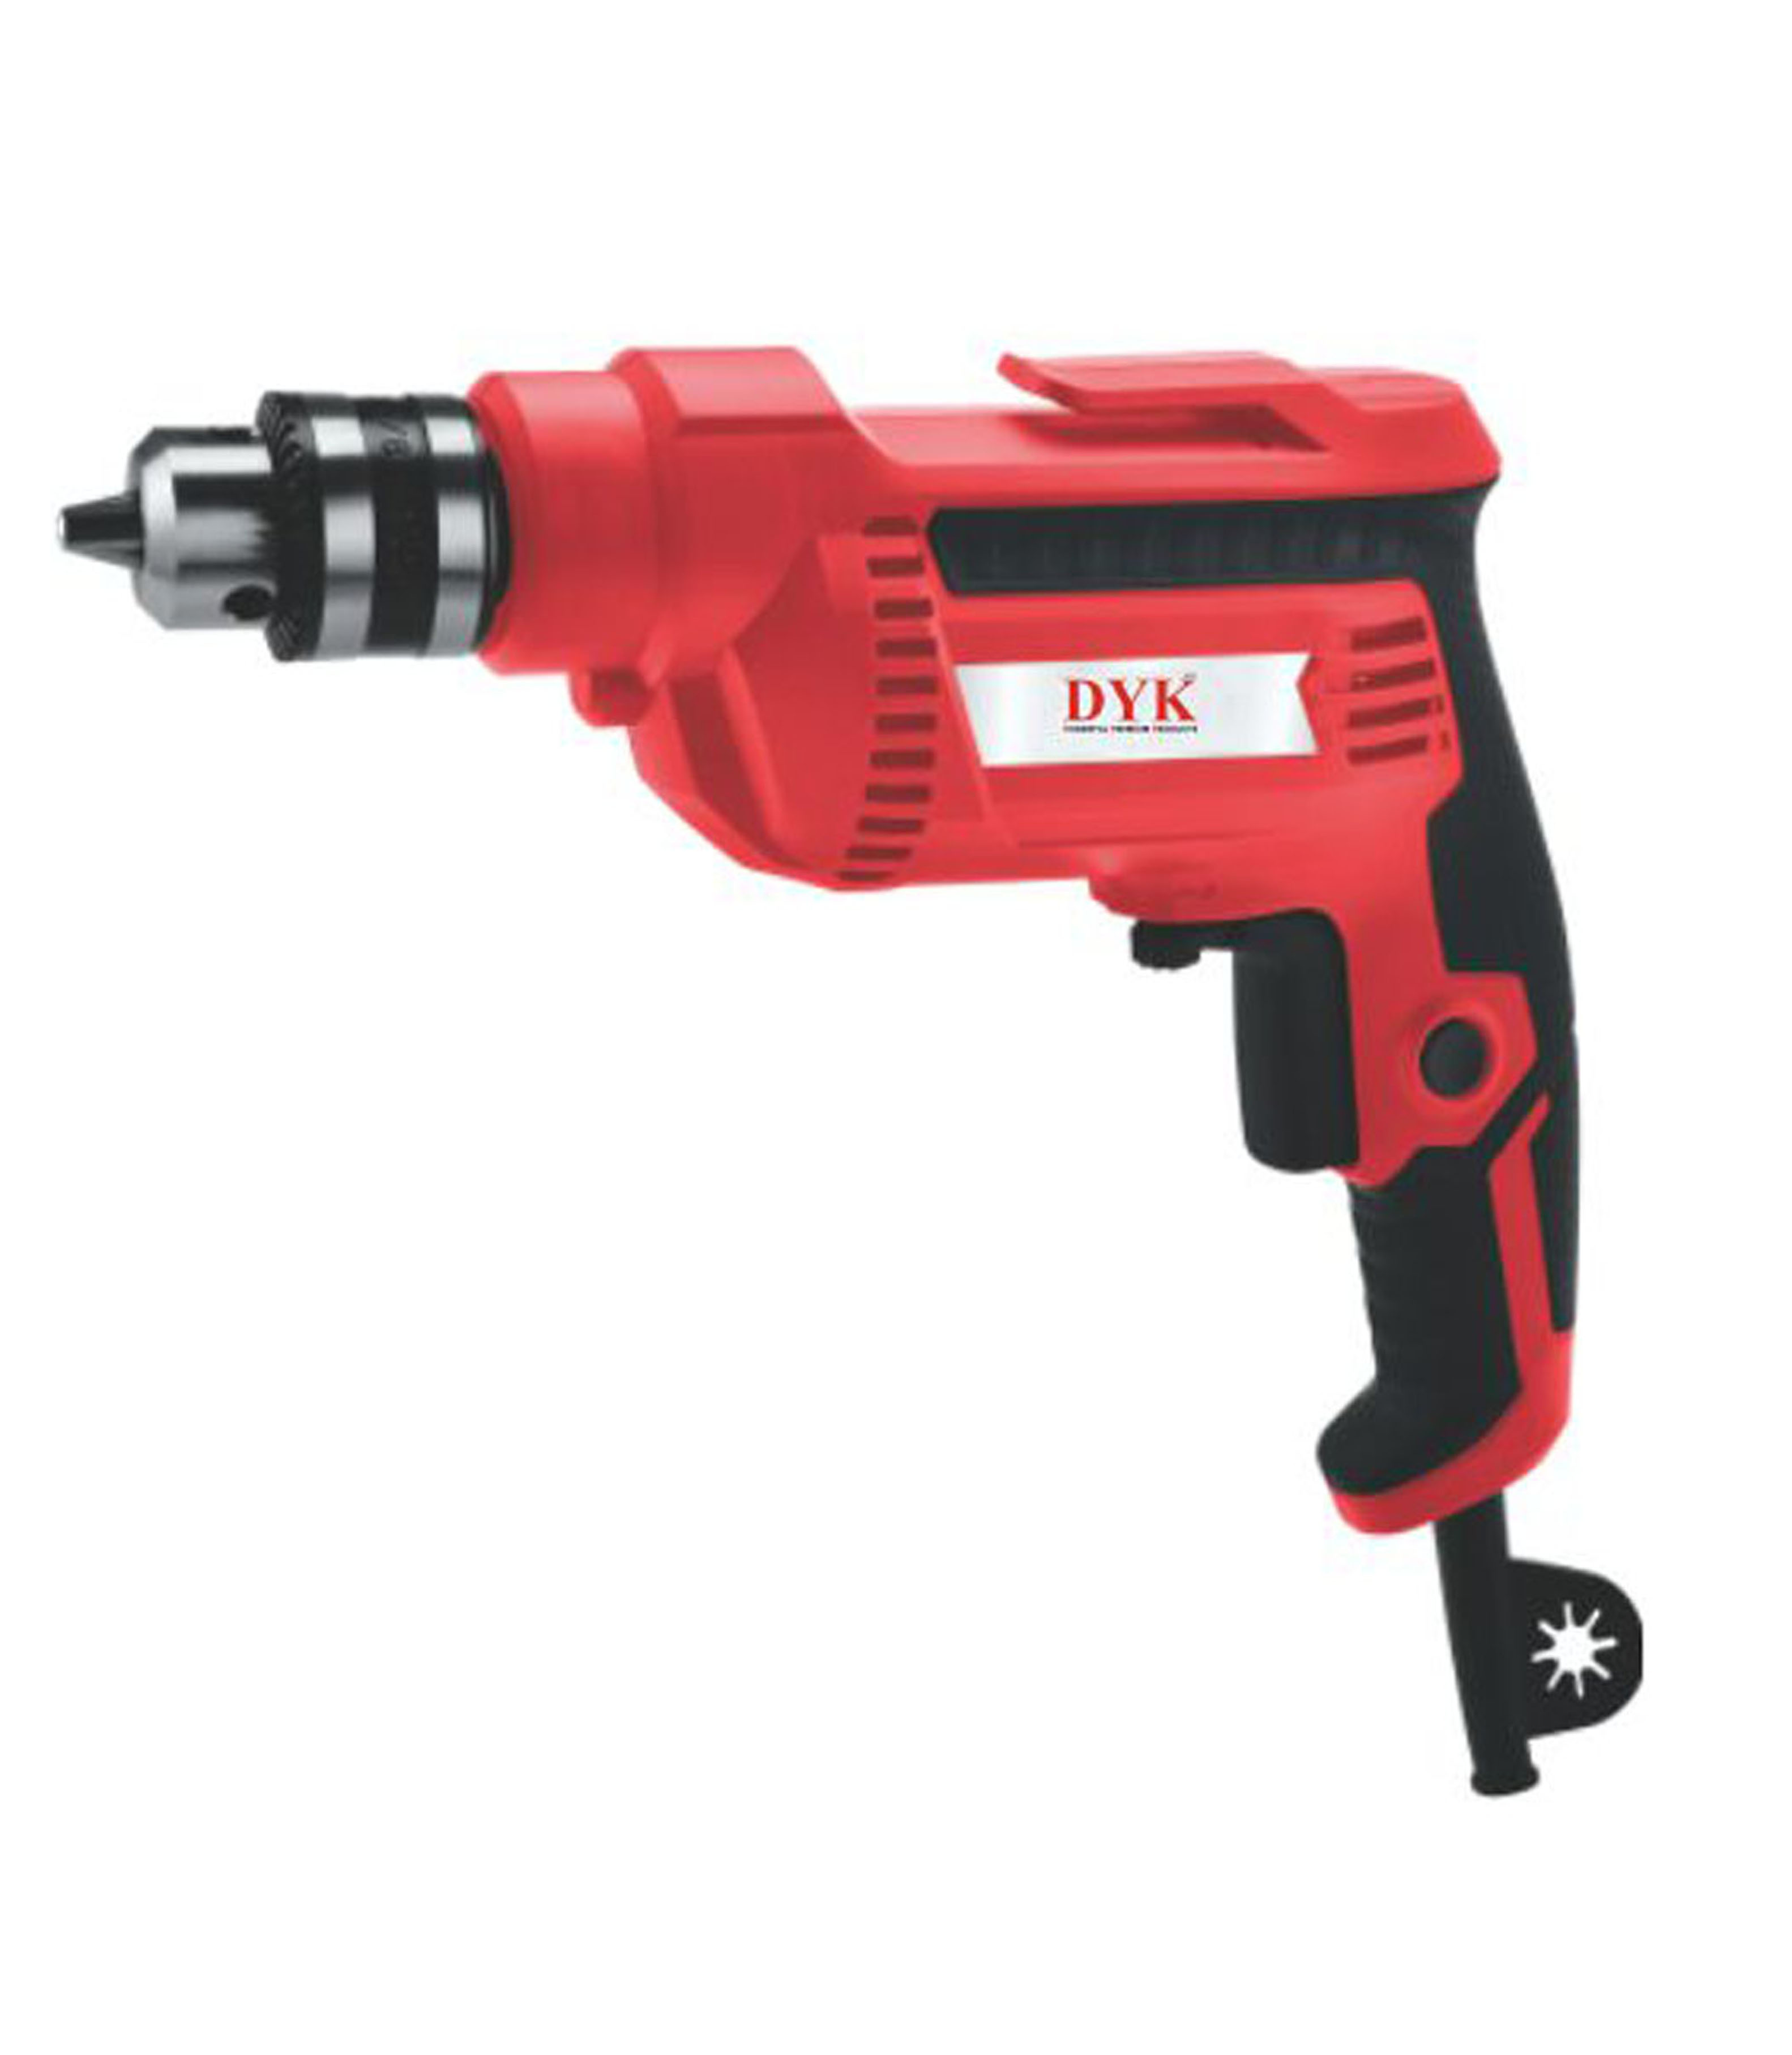 ELECTRIC DRILL - 10mm